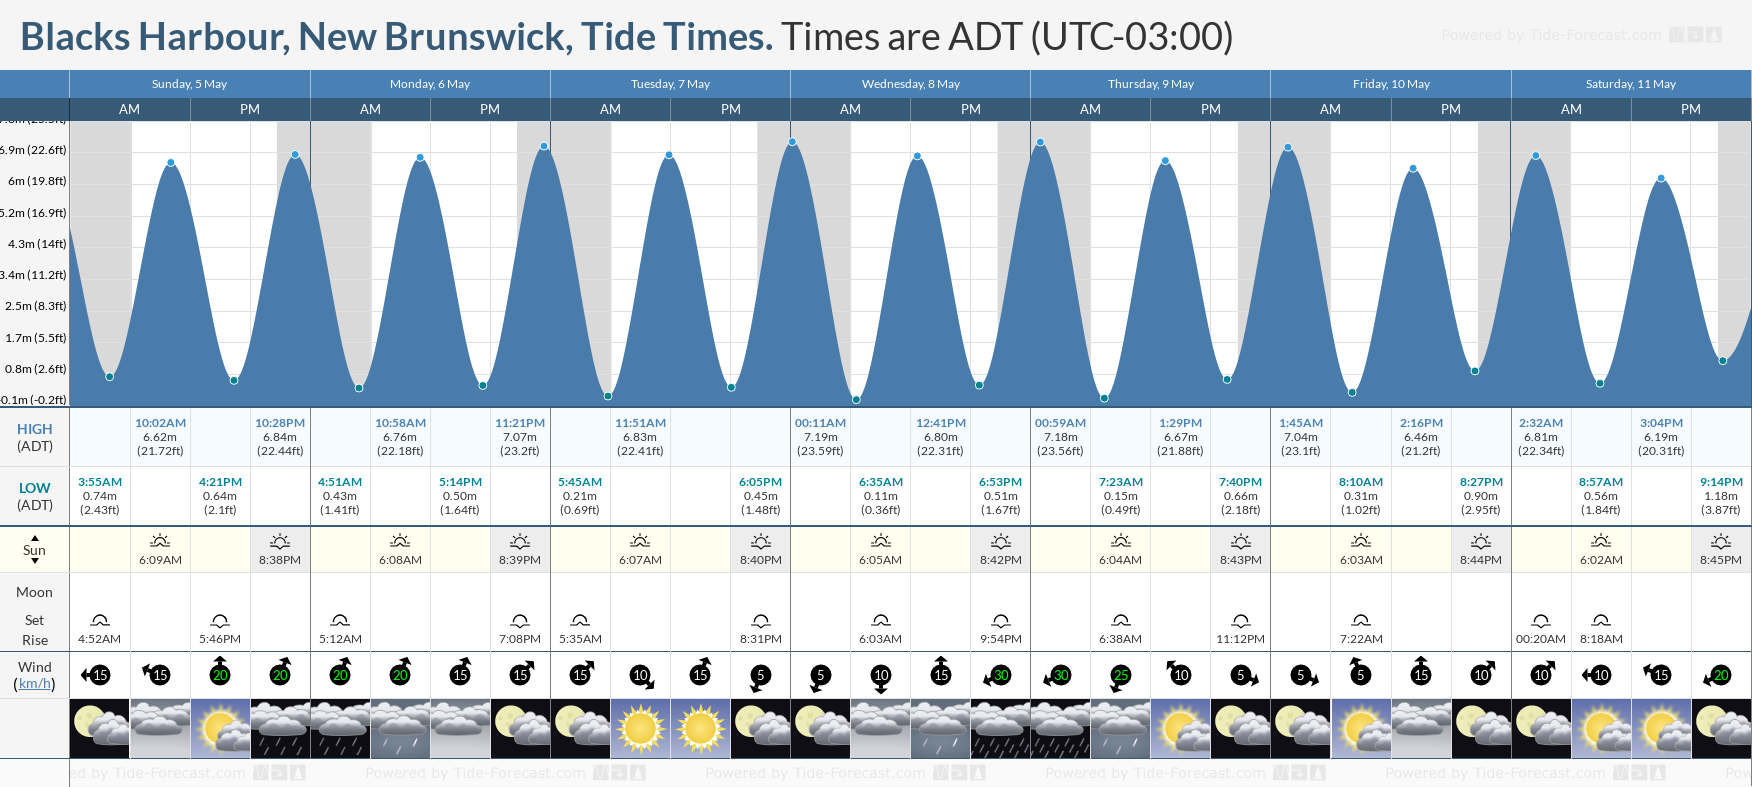 Blacks Harbour, New Brunswick Tide Chart including high and low tide times for the next 7 days